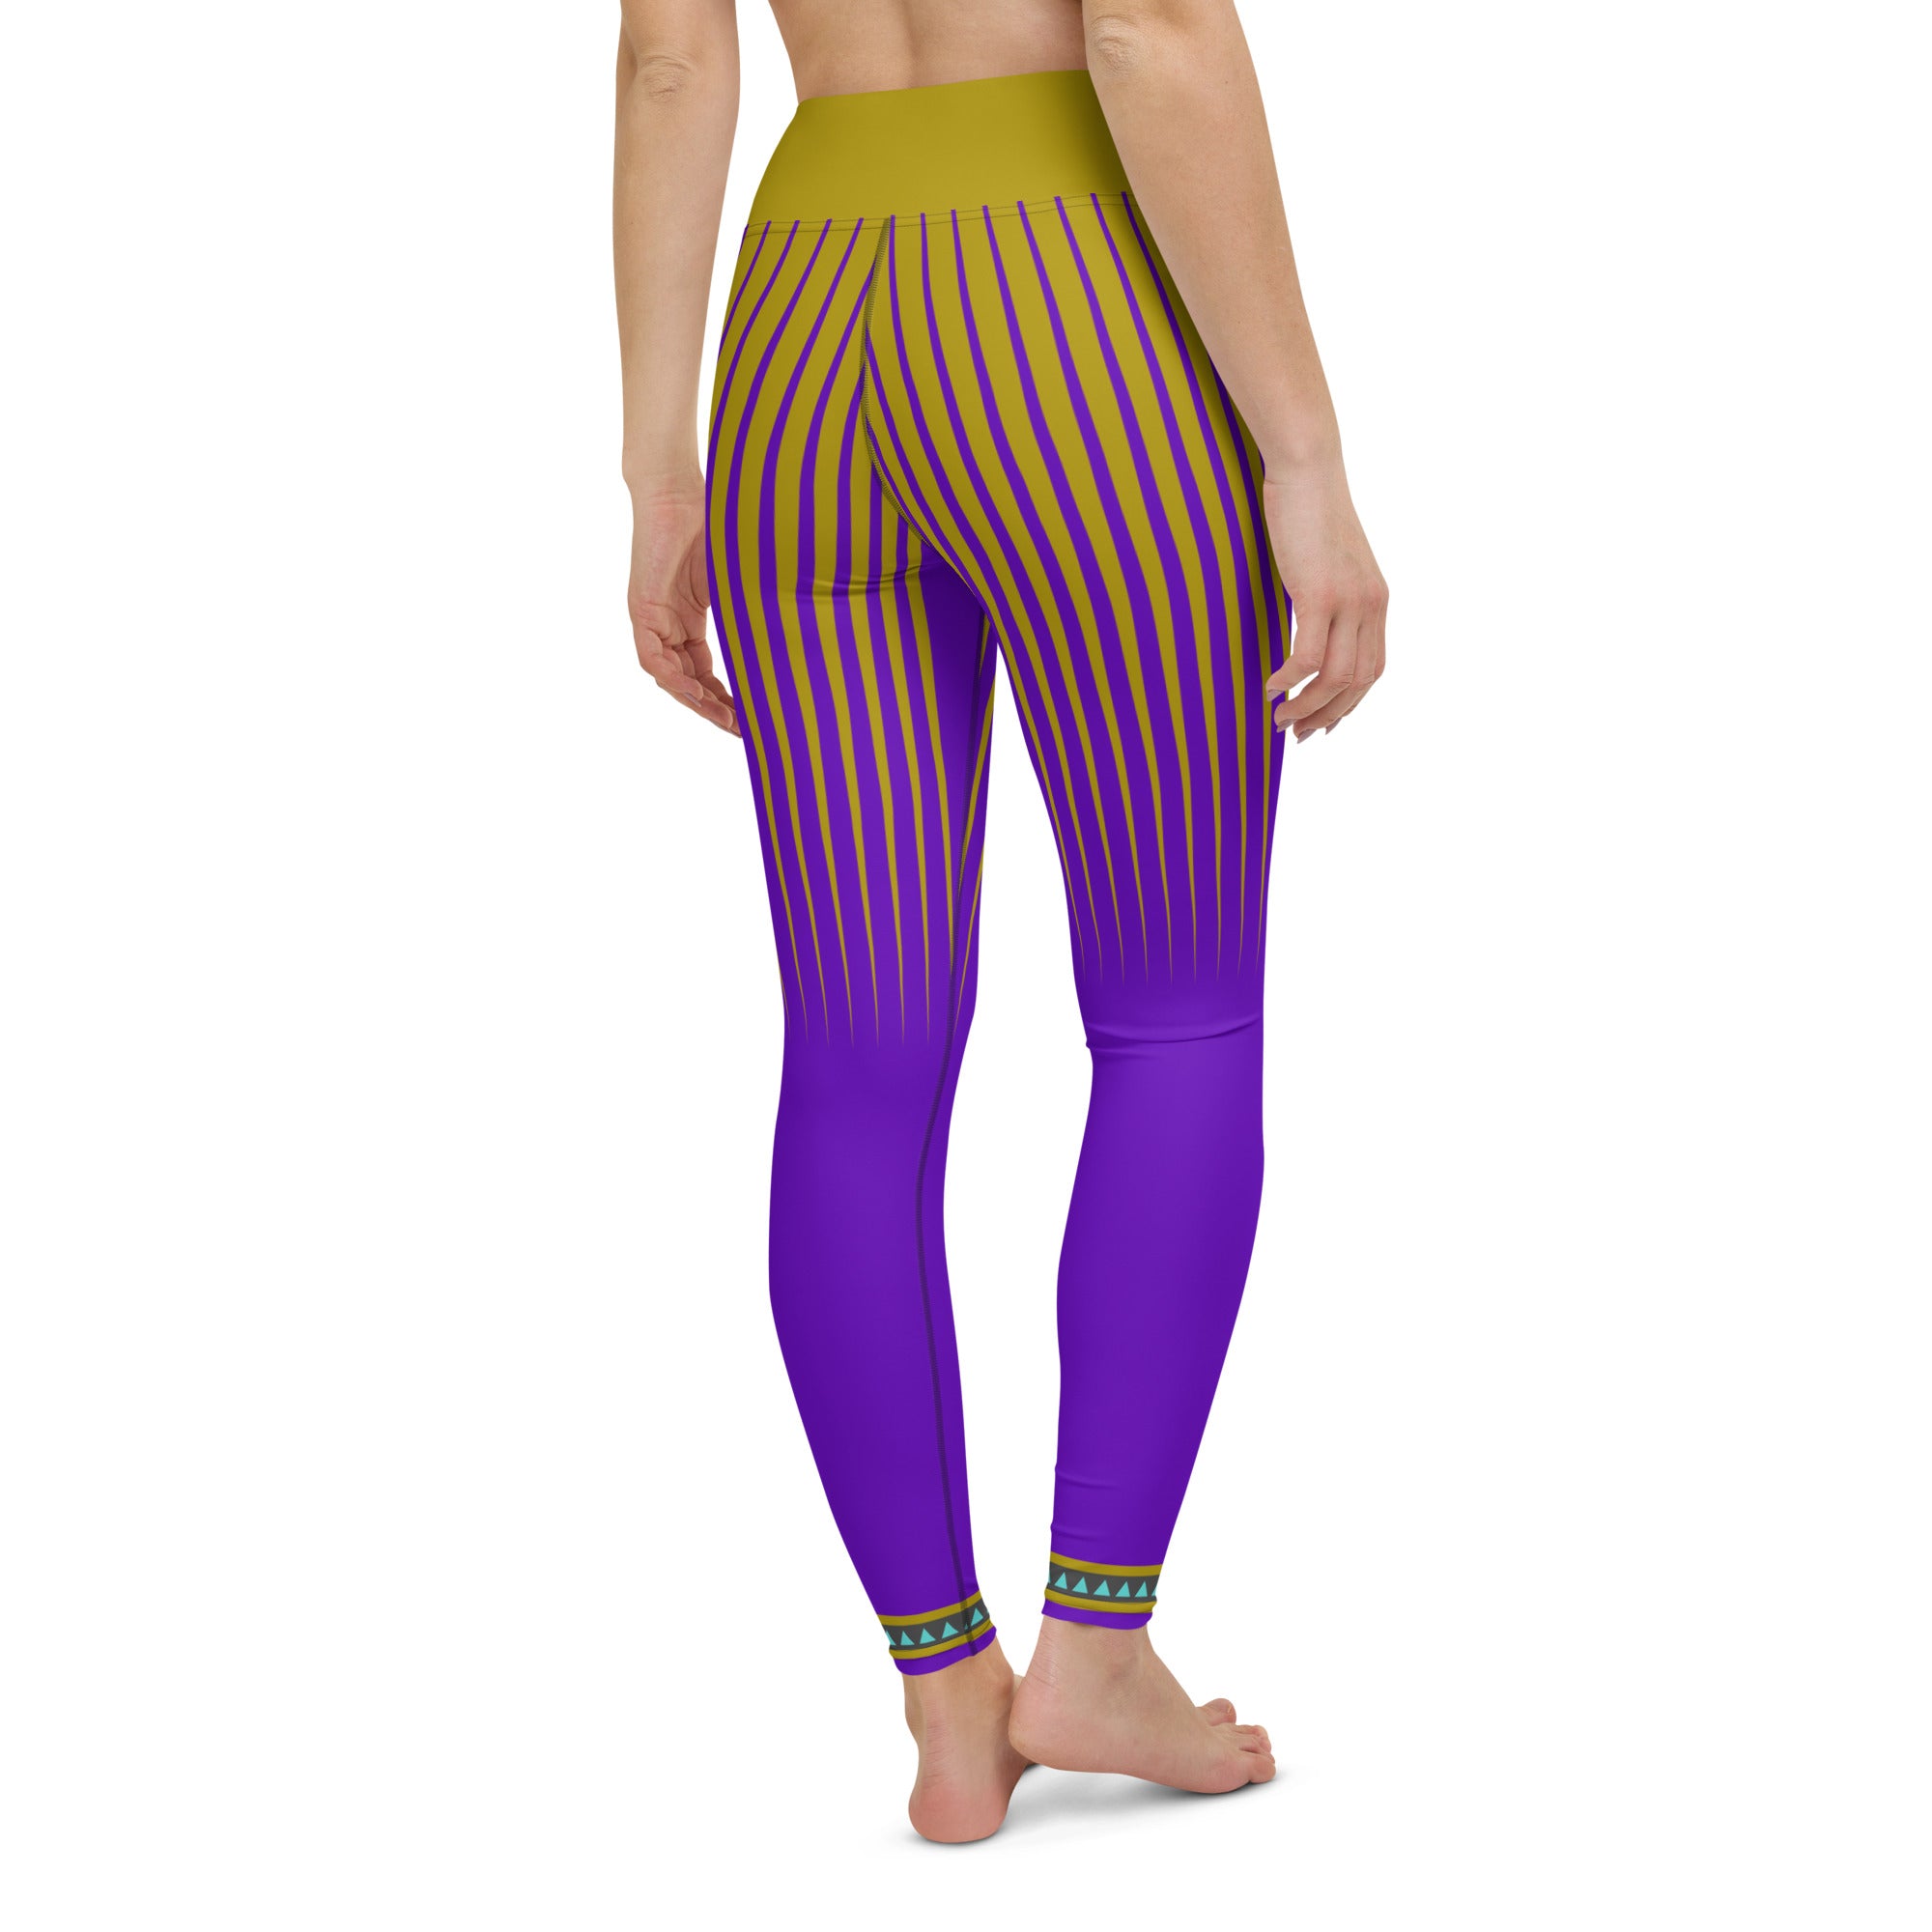 Comfort fit Citrine Circles yoga leggings for all-day wear.